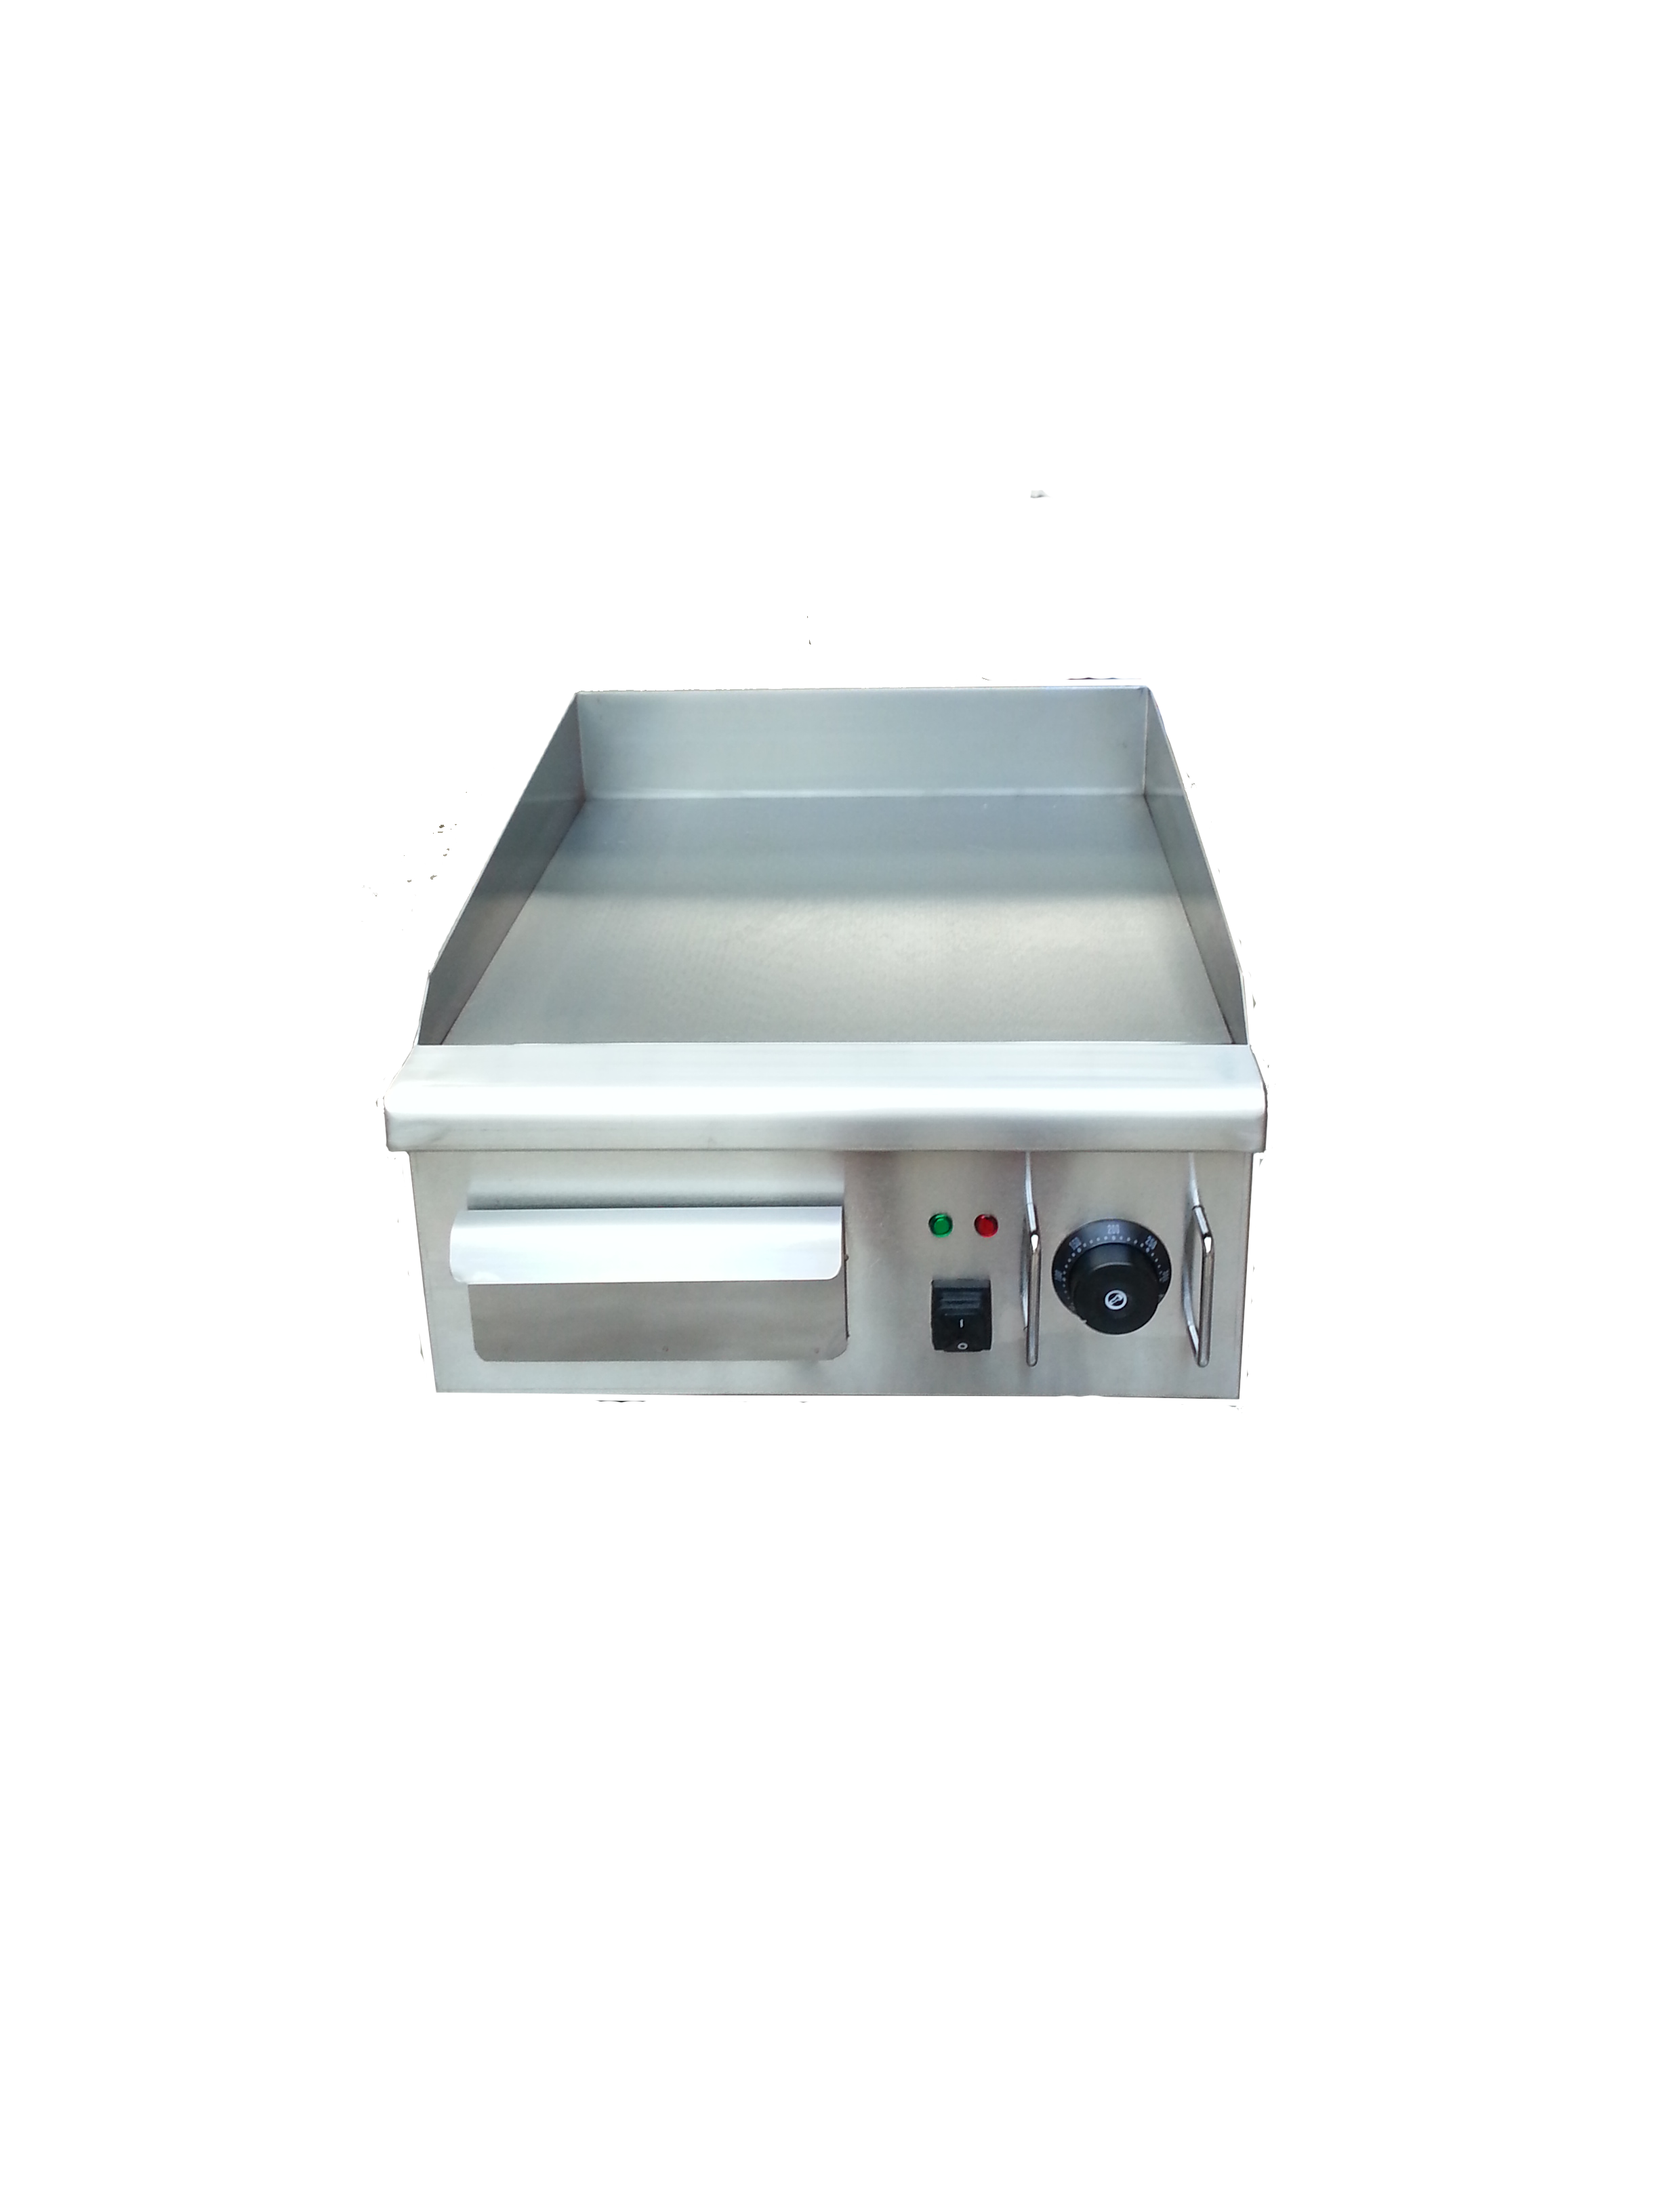 GRT-E410 Factory Supply 2KW Stainless Steel Griddle For Sale